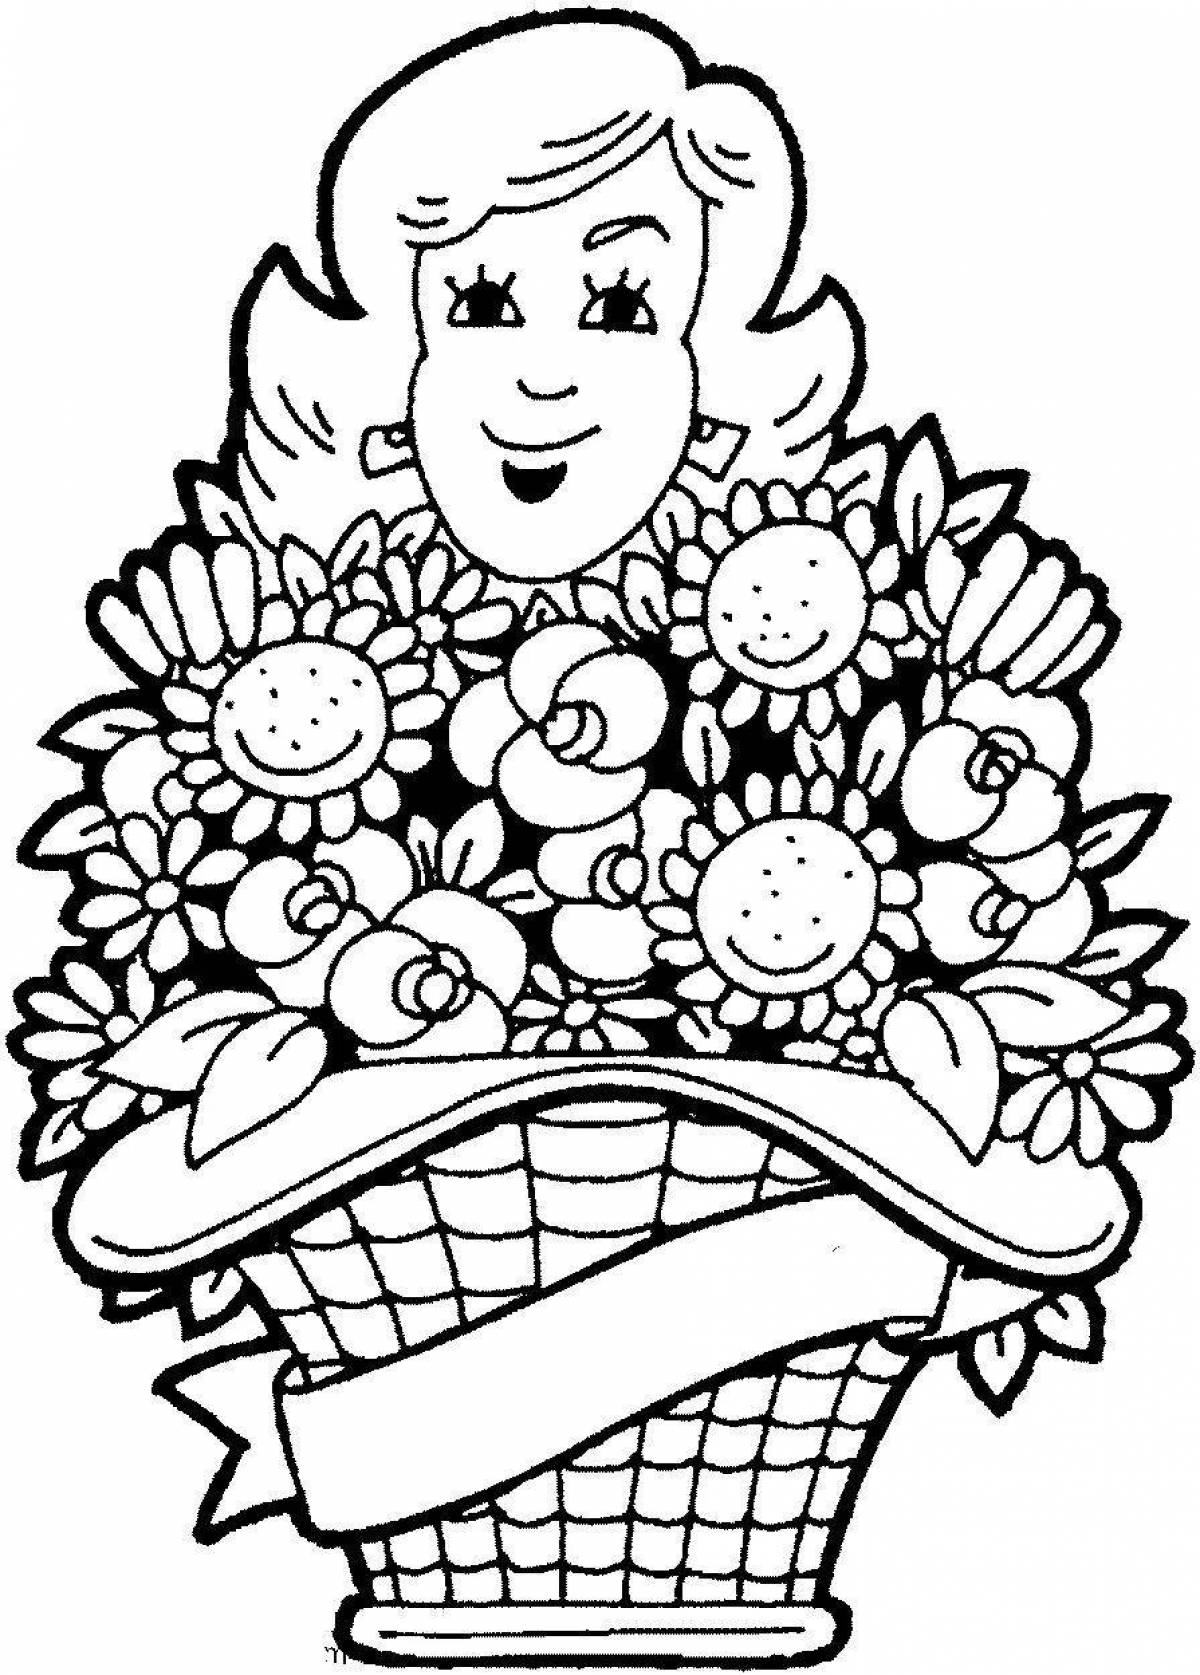 Sublime mom coloring page drawing